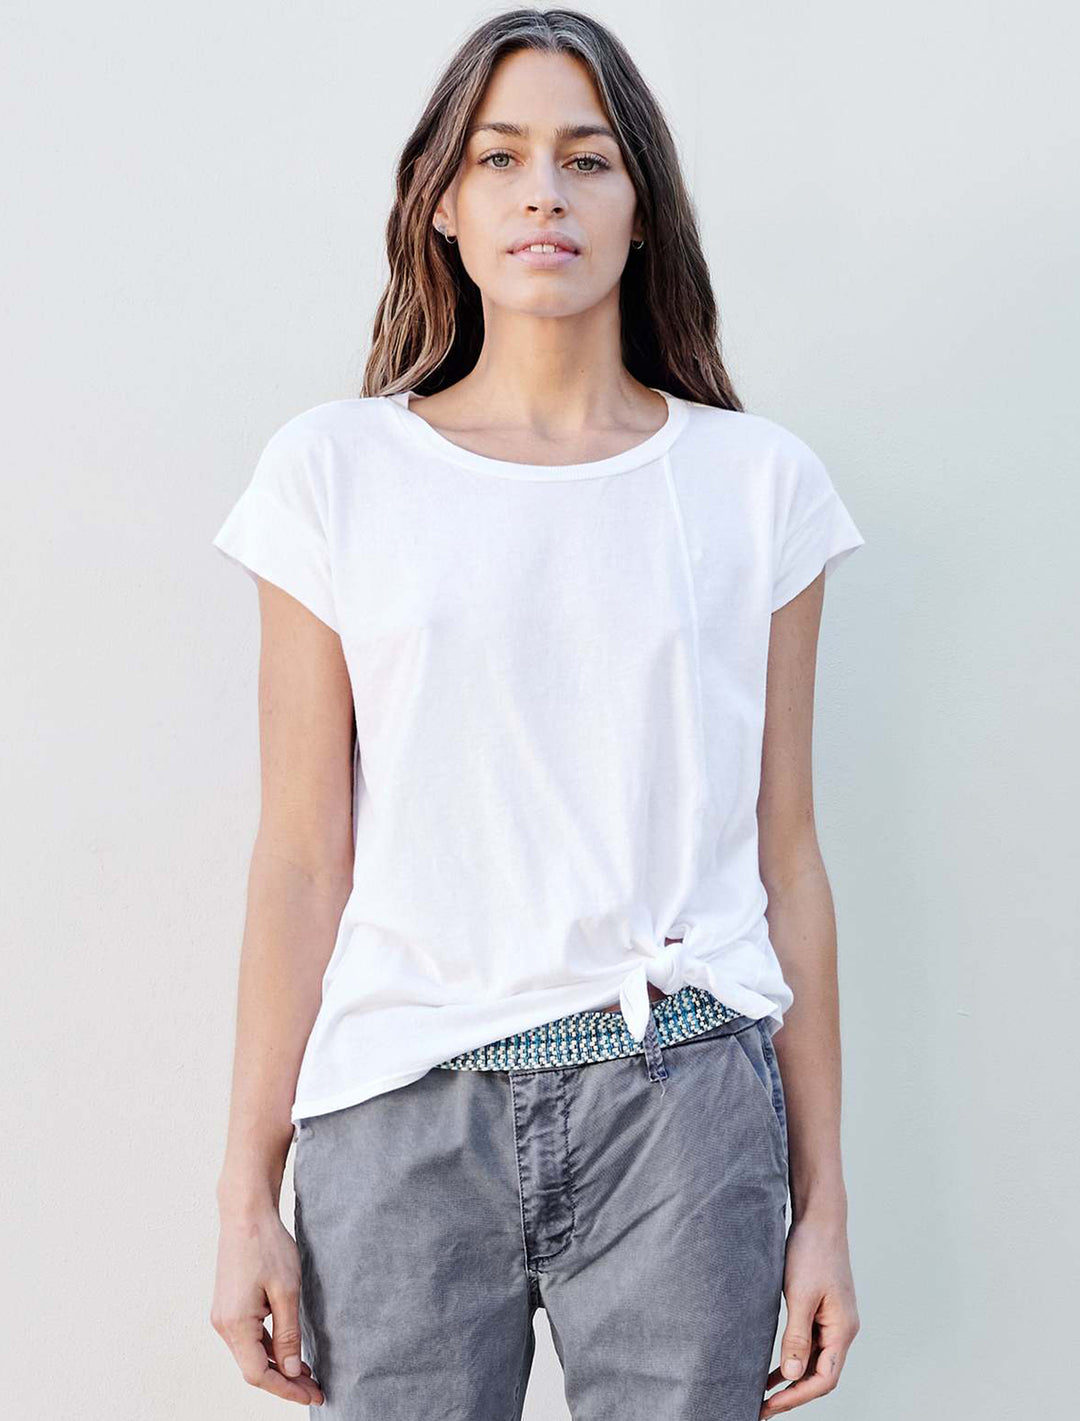 Model wearing Sundry's muscle tee with side slit in white.